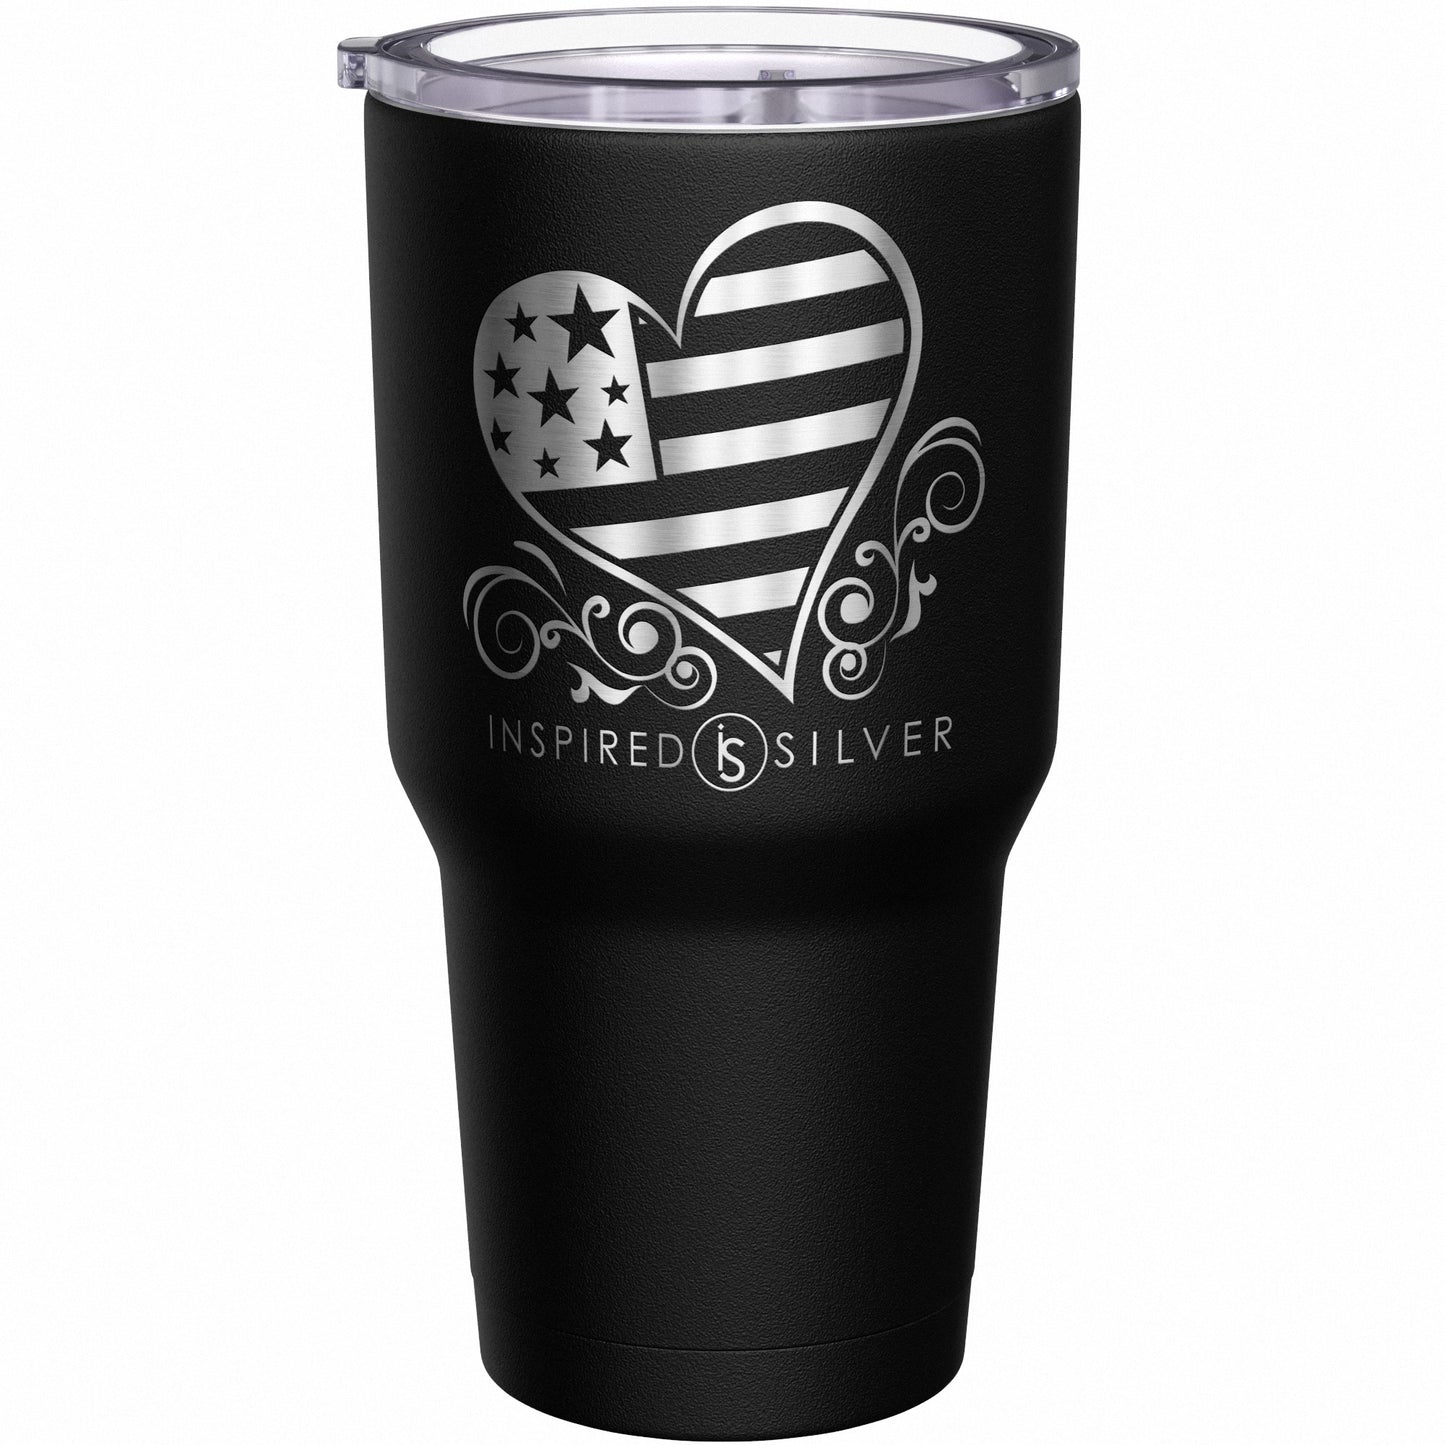 Life Is Too Short to Have Bad Hair Tumbler